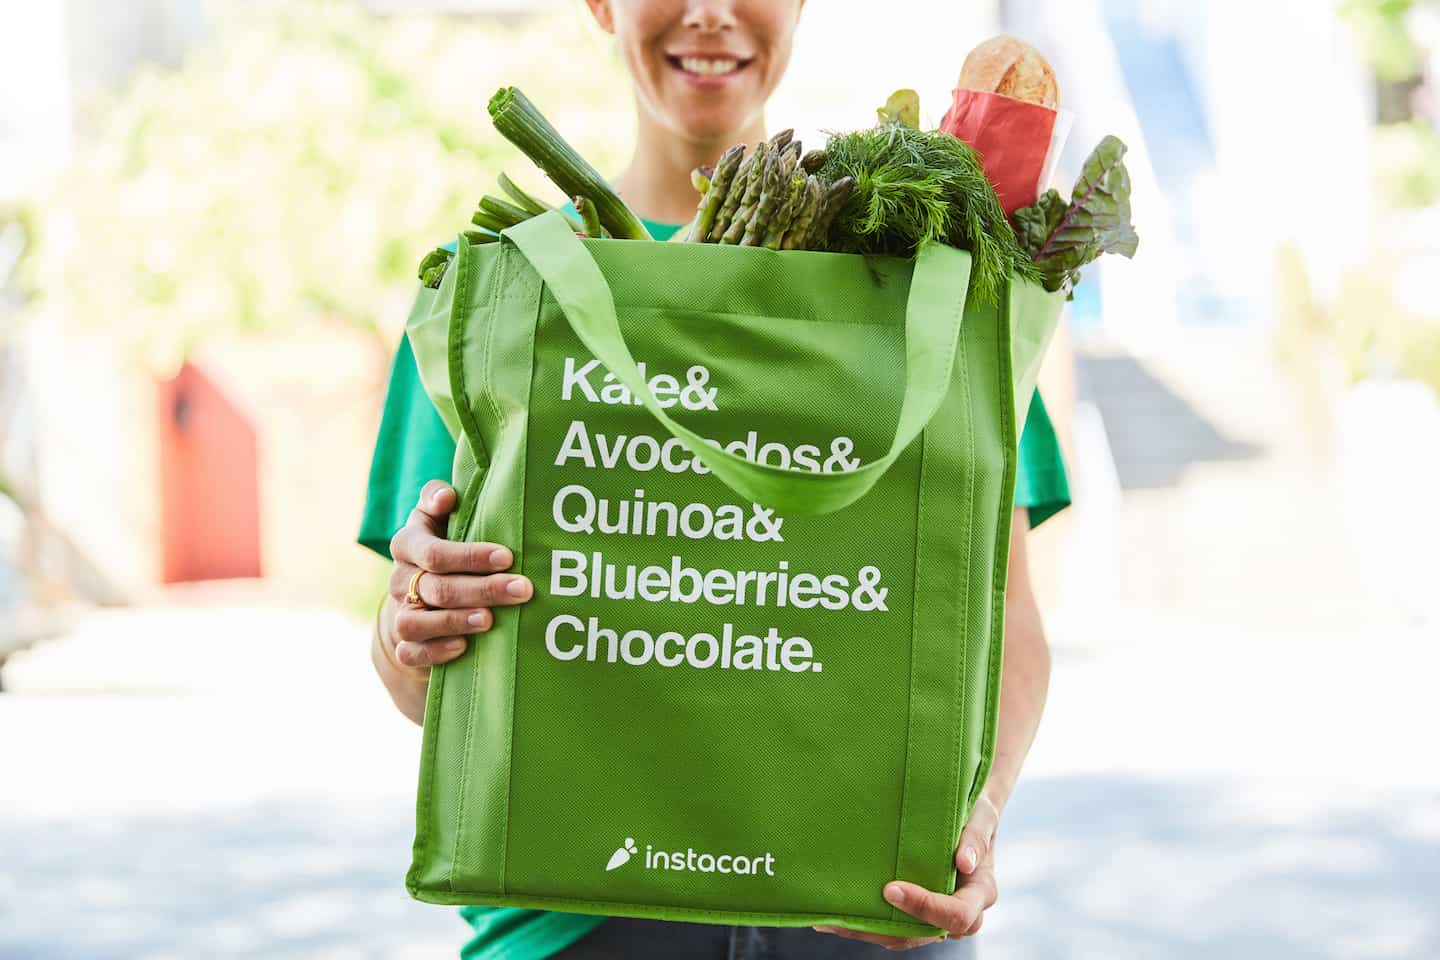 instacart grocery delivery bag